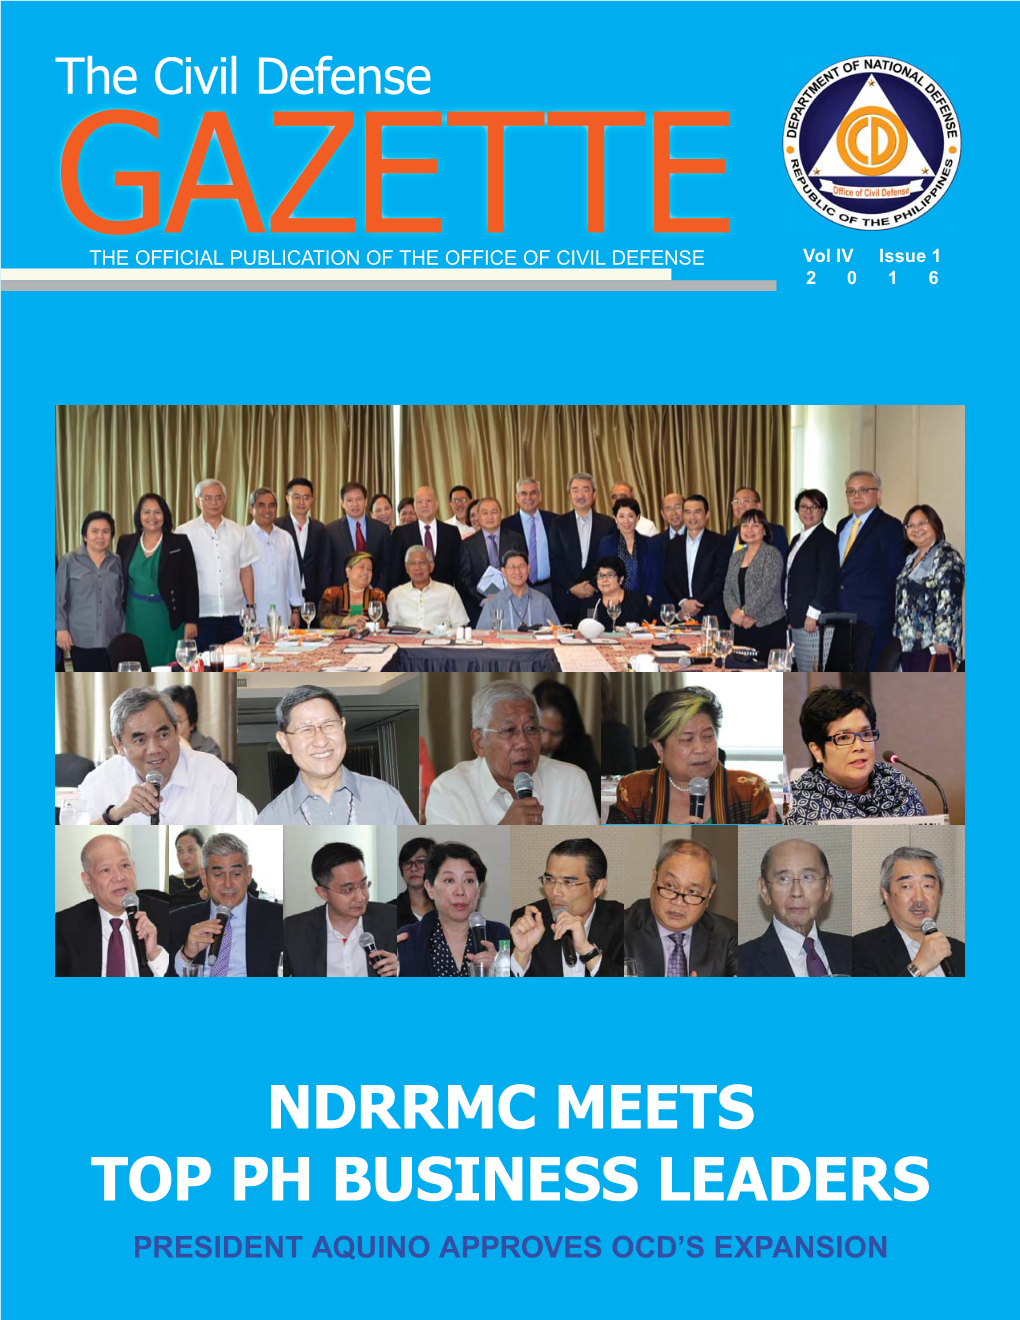 GAZETTE Vol IV Issue 1 the OFFICIAL PUBLICATION of the OFFICE of CIVIL DEFENSE 2 0 1 6